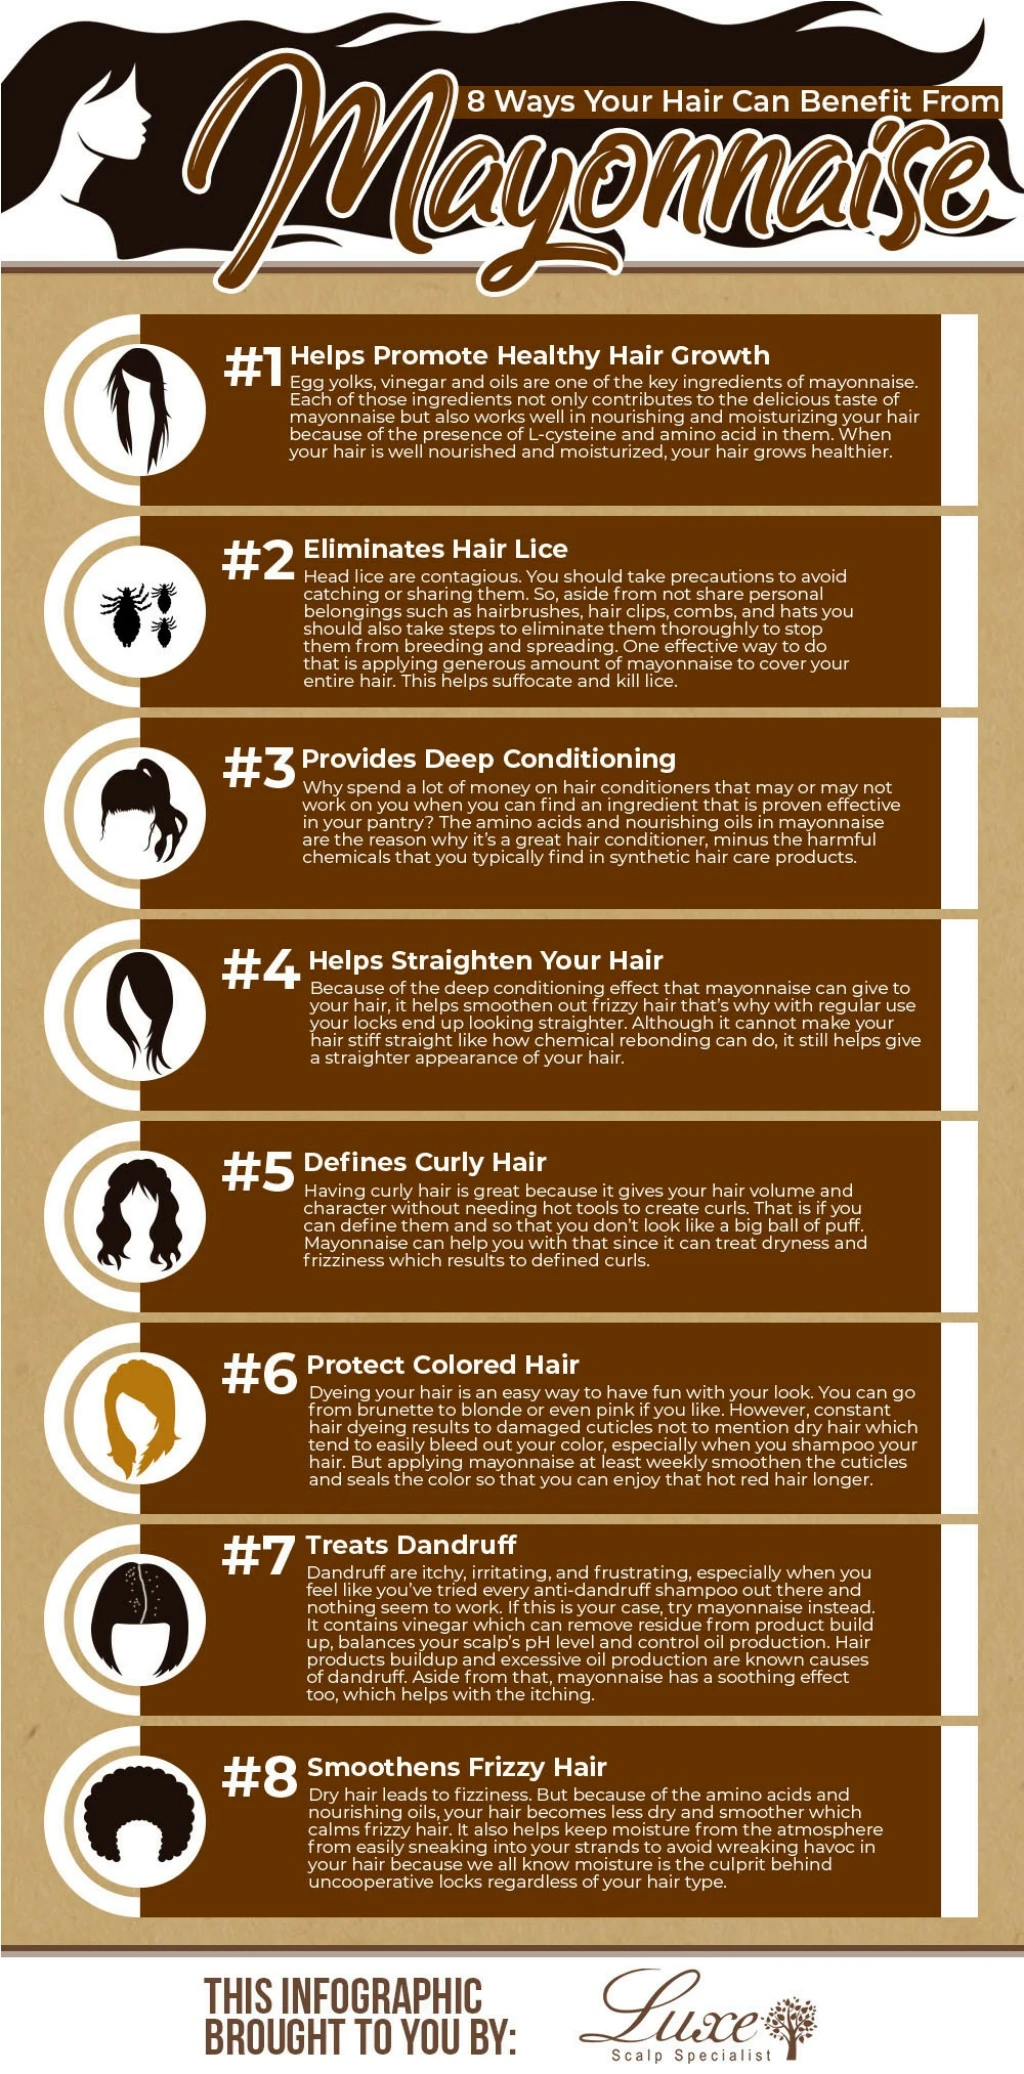 PPT - 8 Ways Your Hair Can Benefit From Mayonnaise PowerPoint Presentation  - ID:8274813